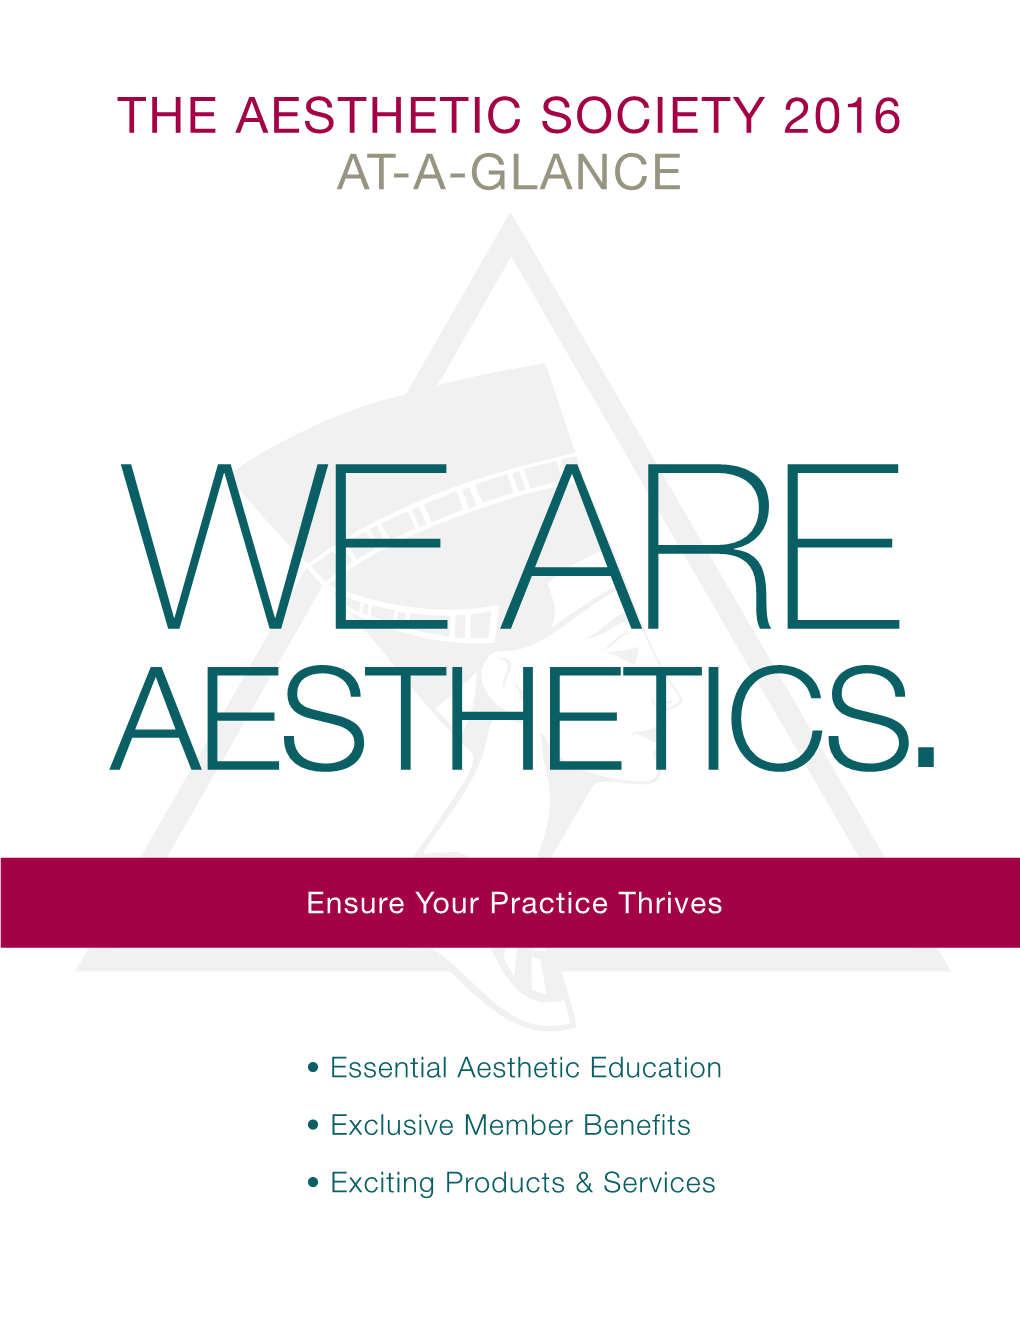 The Aesthetic Society 2016 At-A-Glance